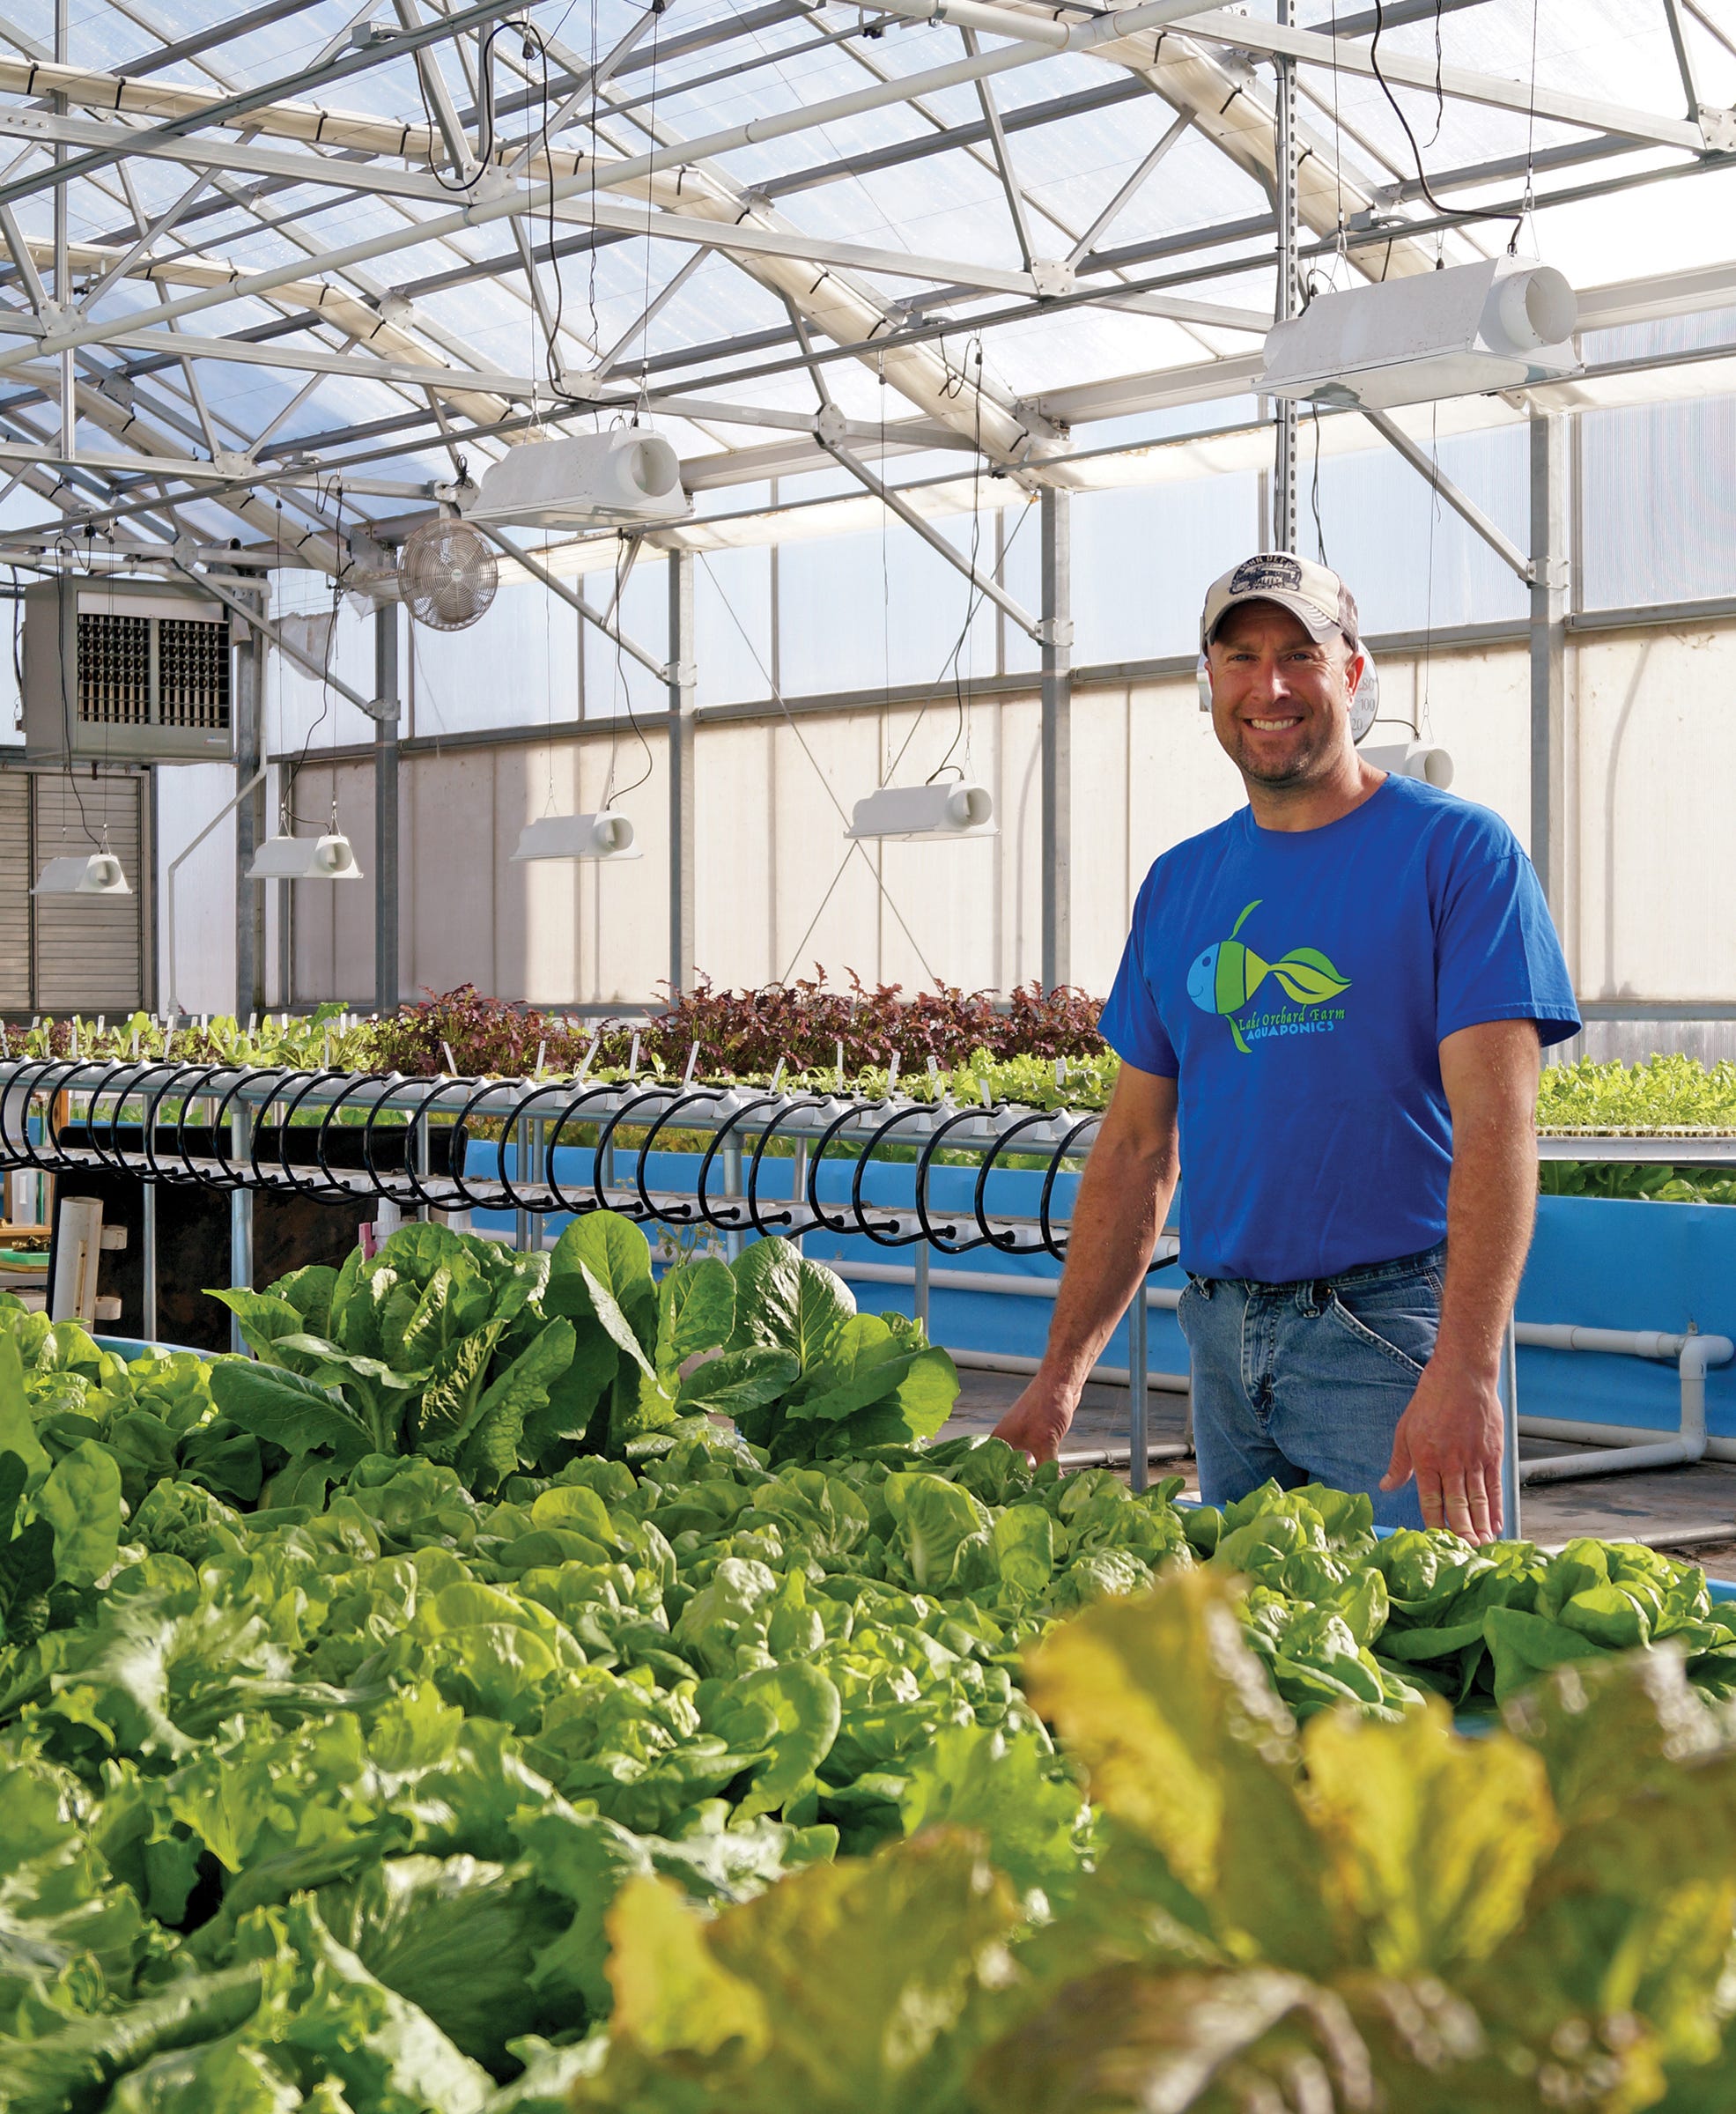 Sixth generation farmer, Nate Calkins, used to work with cattle but now he spends his days handling a new ‘stock’ as co-owner of Lake Orchard Farm Aquaponics.